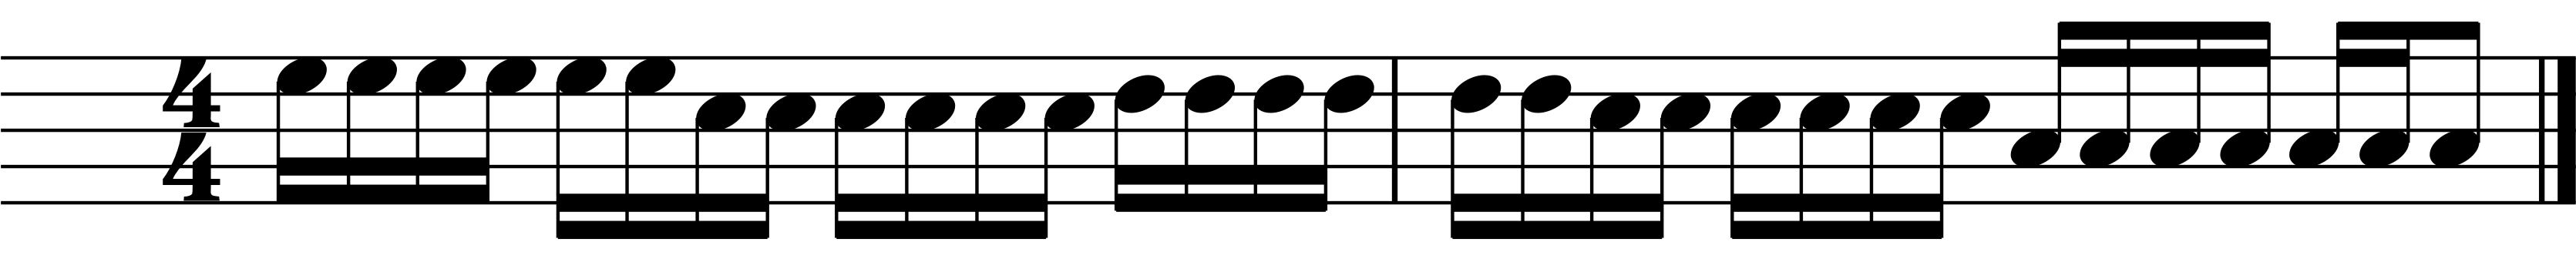 Single stroke roll played as groups of six